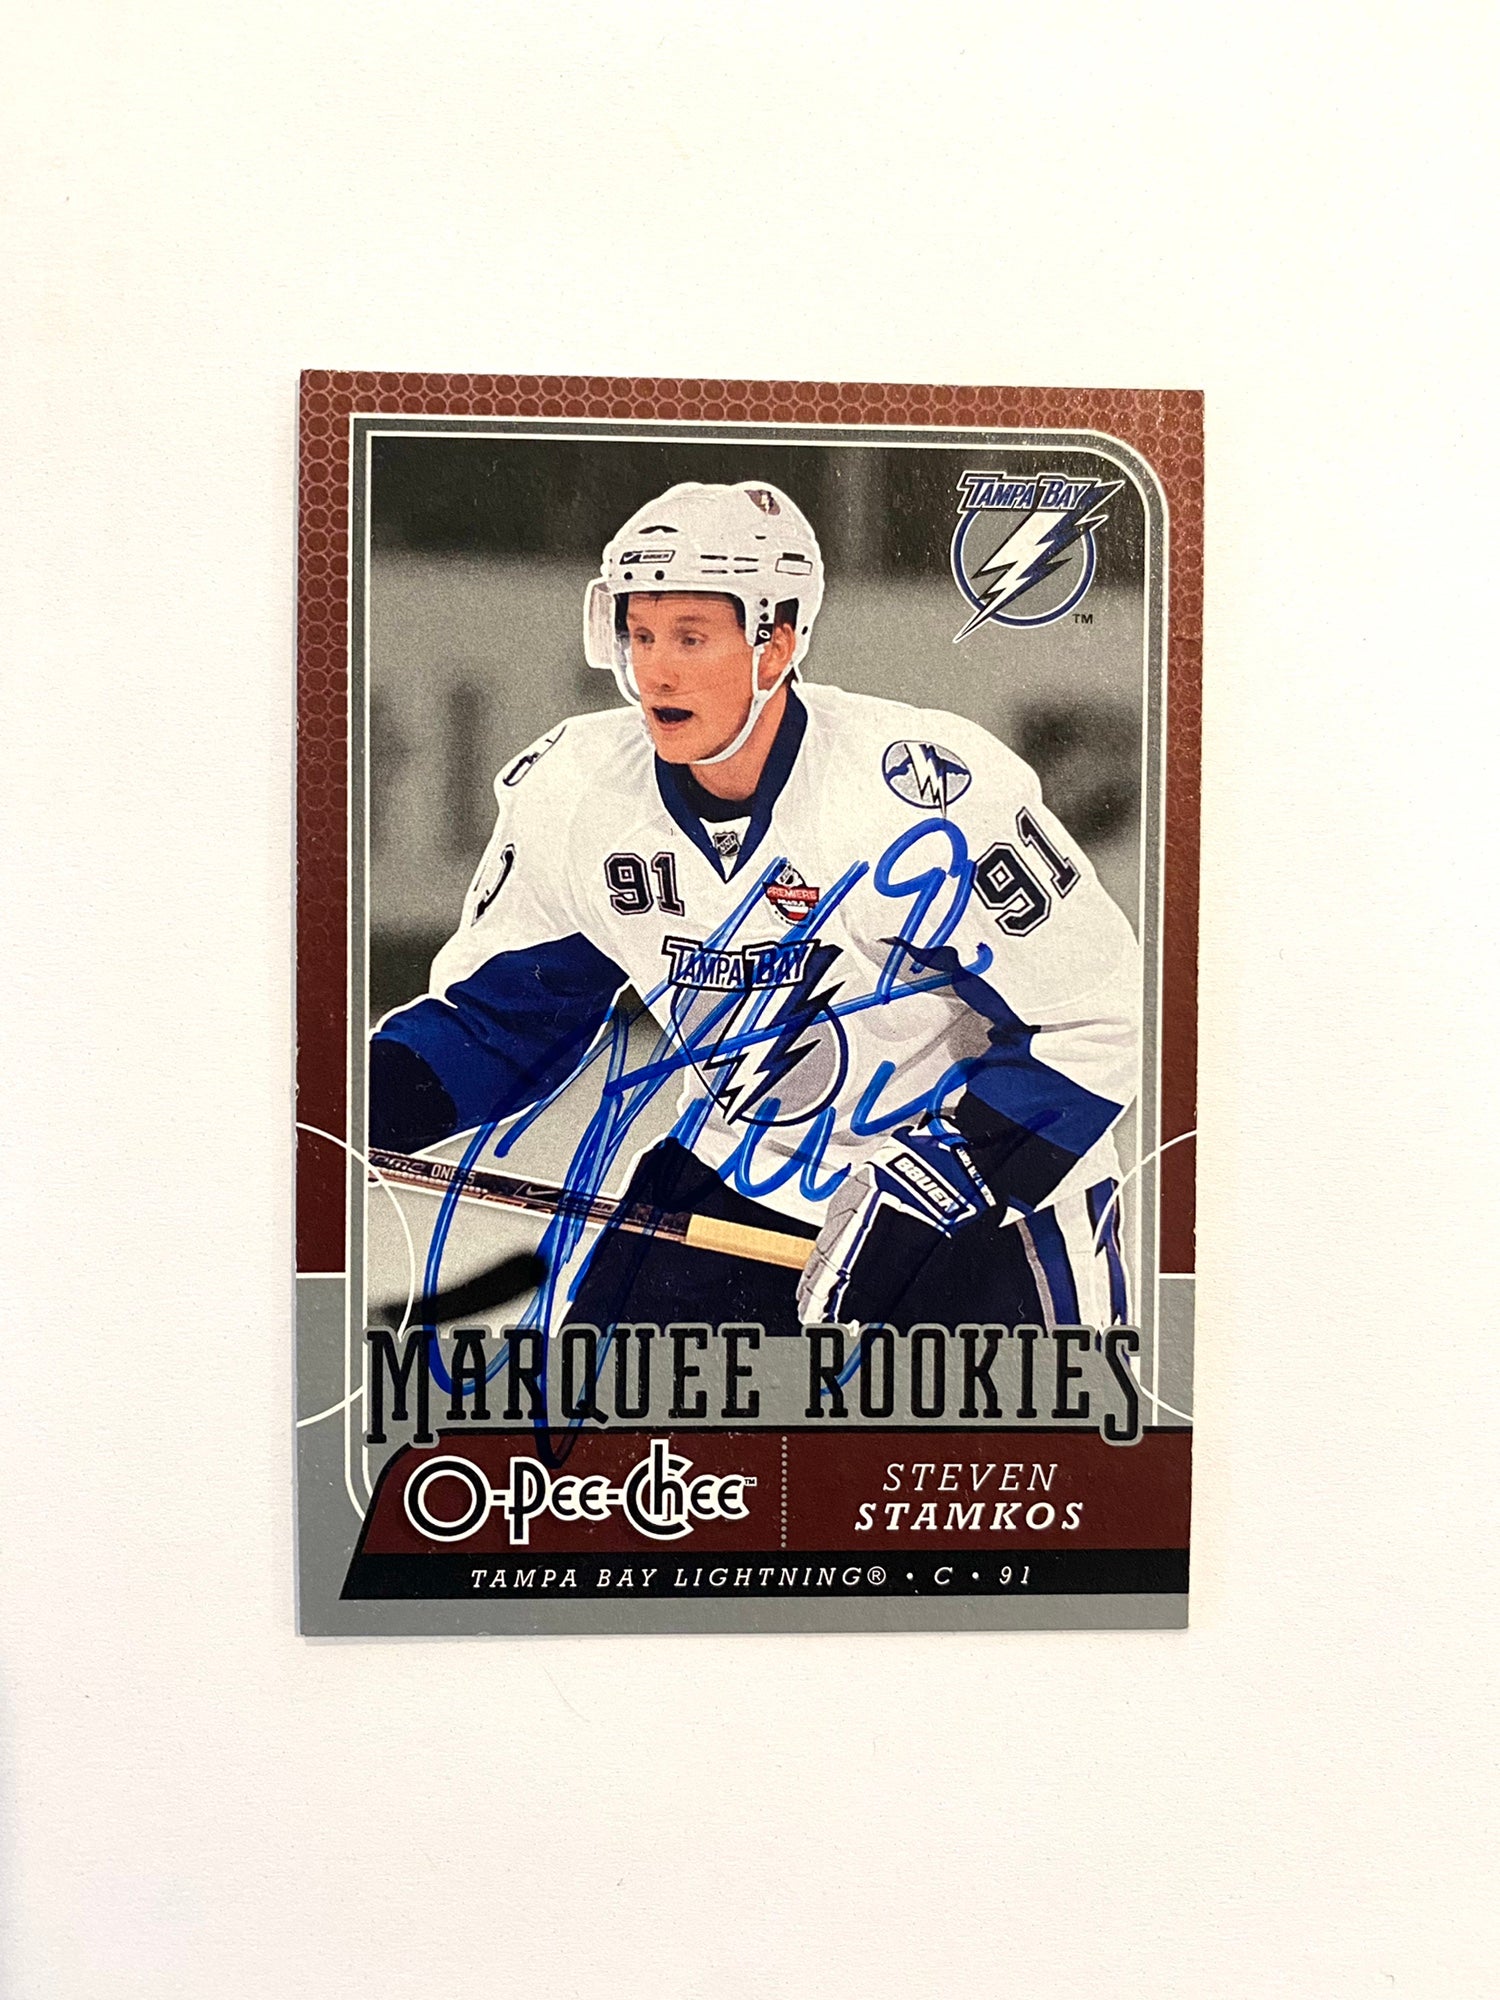 Luc Robitaille Cards, Rookies and Autographed Memorabilia Buying Guide